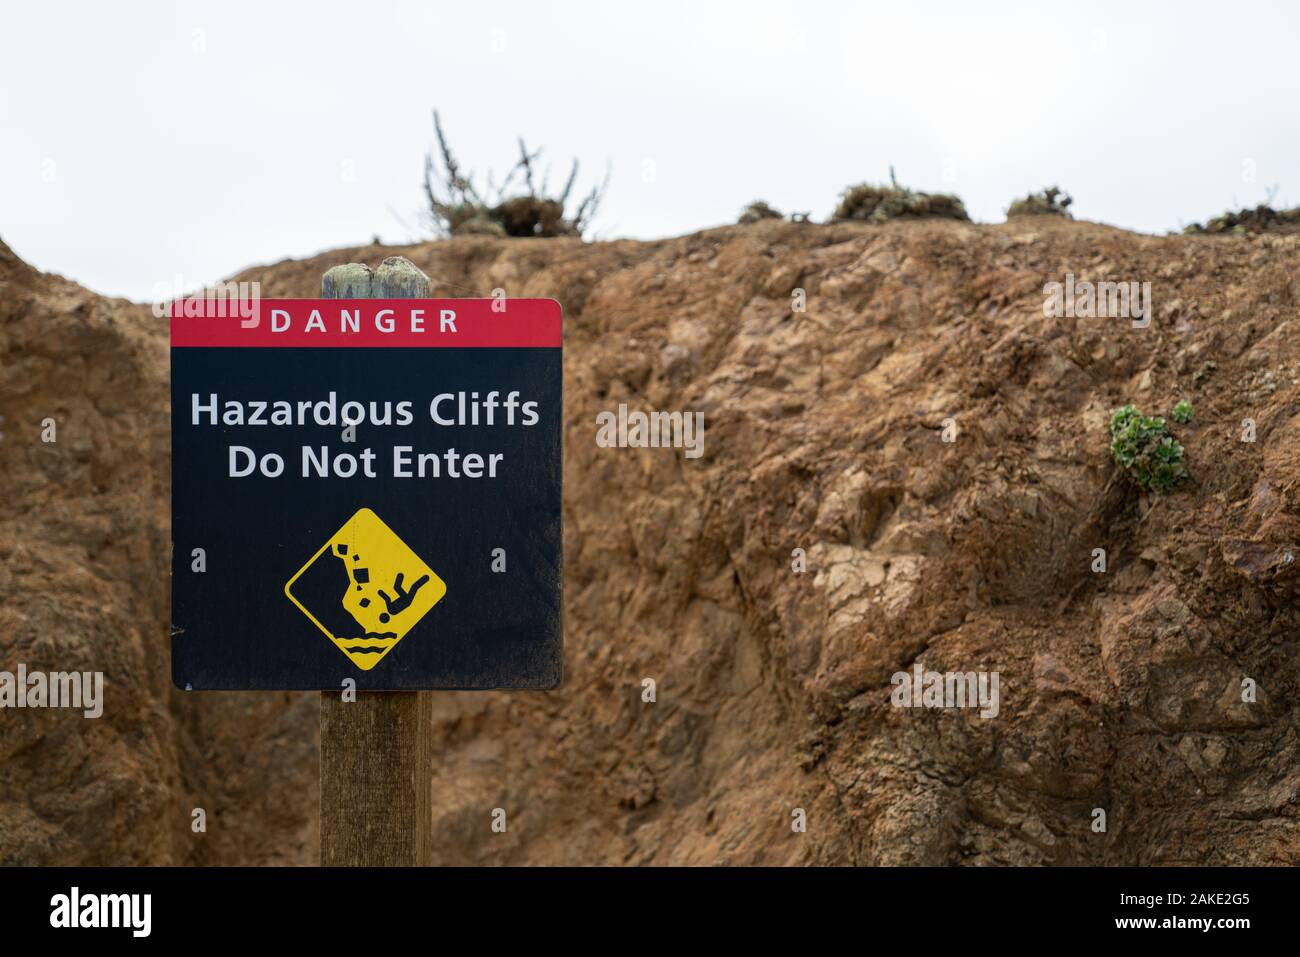 Danger hazardous cliffs do not enter with person falling sign leading up path hiking trail Stock Photo